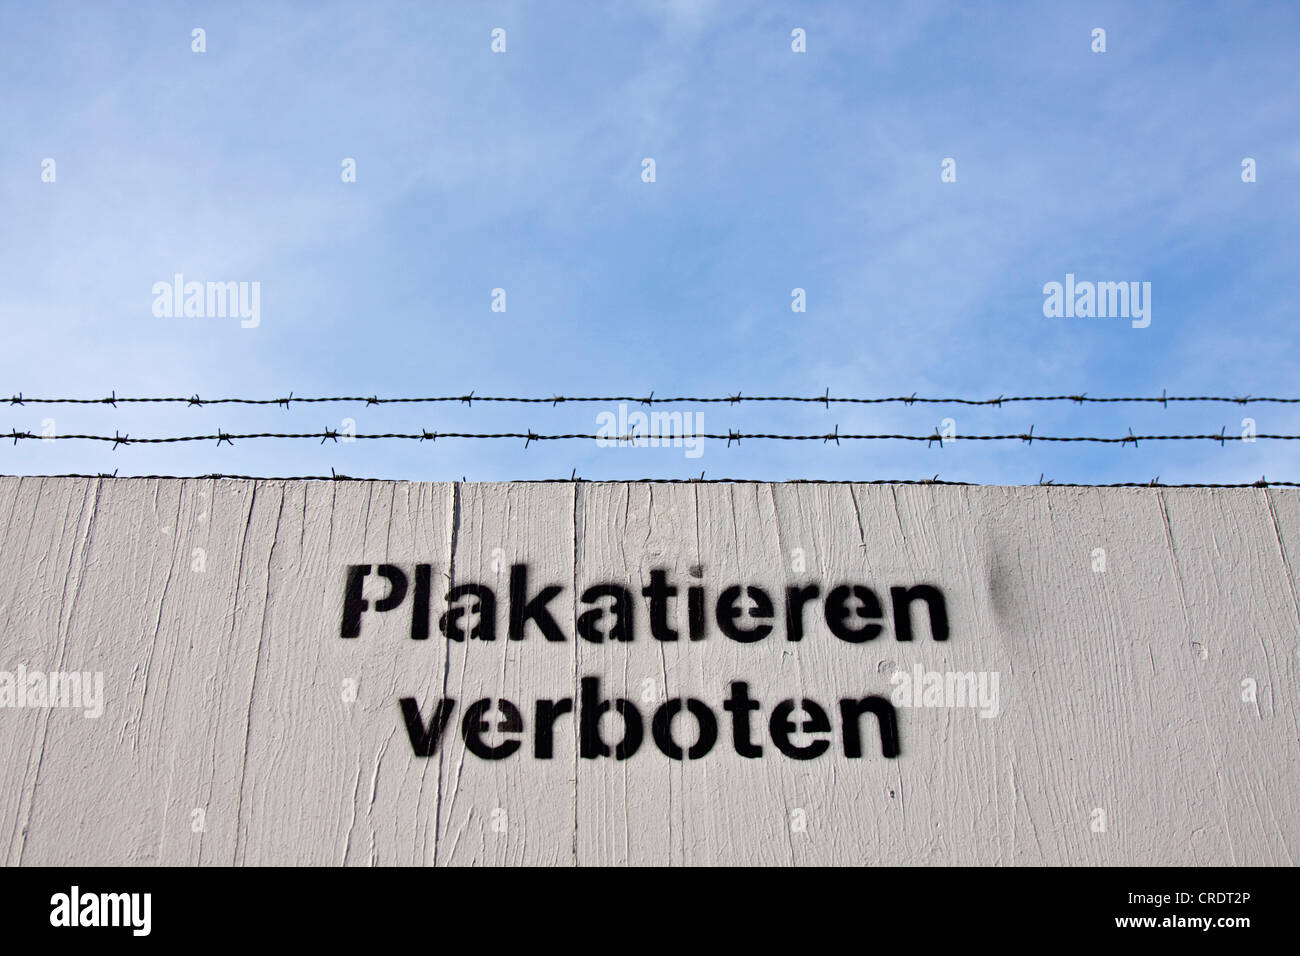 Sprayed-lettering "Plakatieren verboten" or "no posters" on a fence with barbed wire Stock Photo